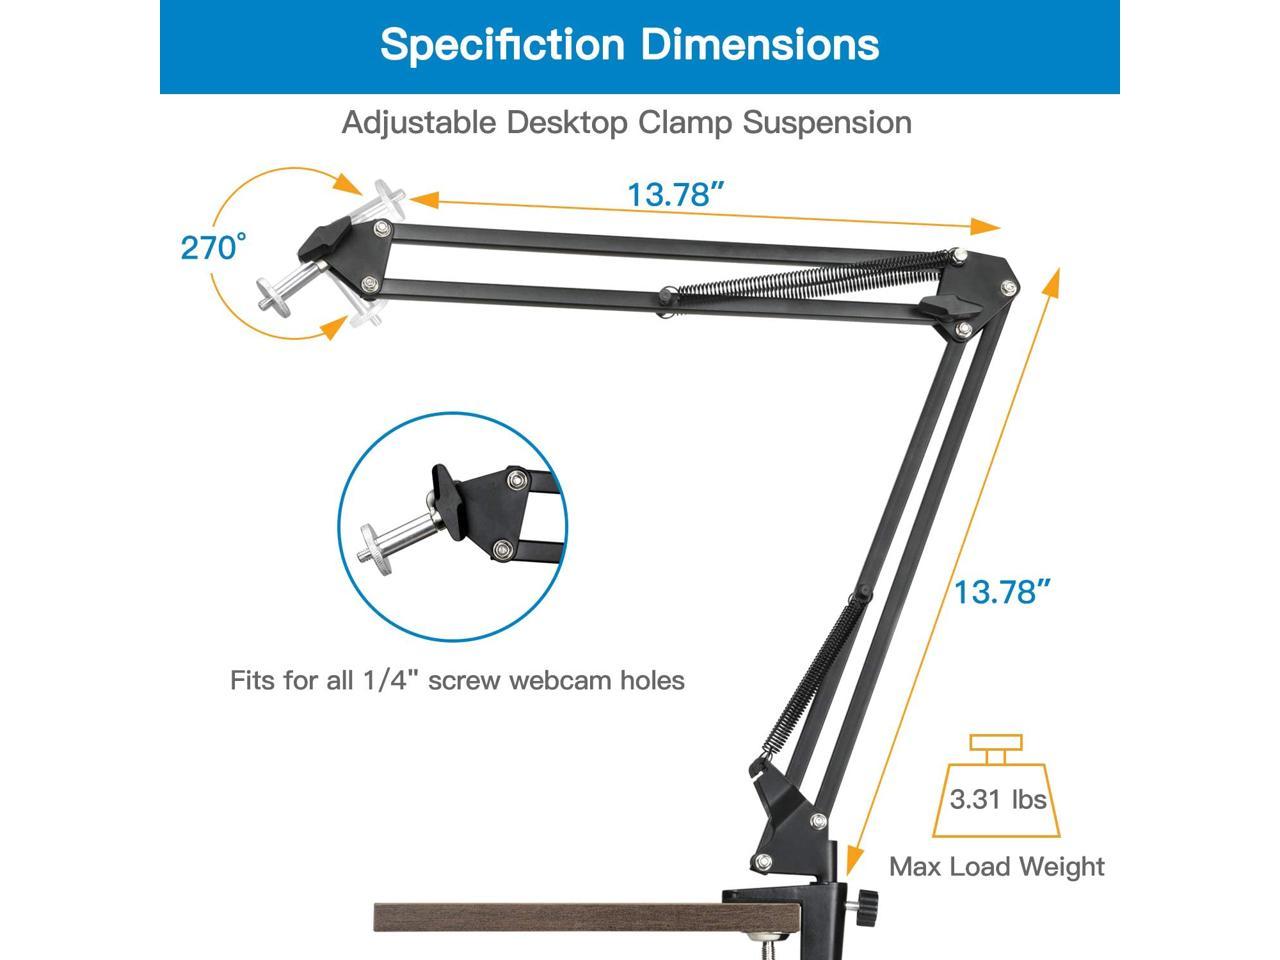 YIPUTONG Webcam Bracket for Cell Phones Adjustable Desktop Clamp Suspension Boom Scissor Arm Stand Holder with Mounting Clip Built-in 1//4Screw Compatible with Webcam Camera